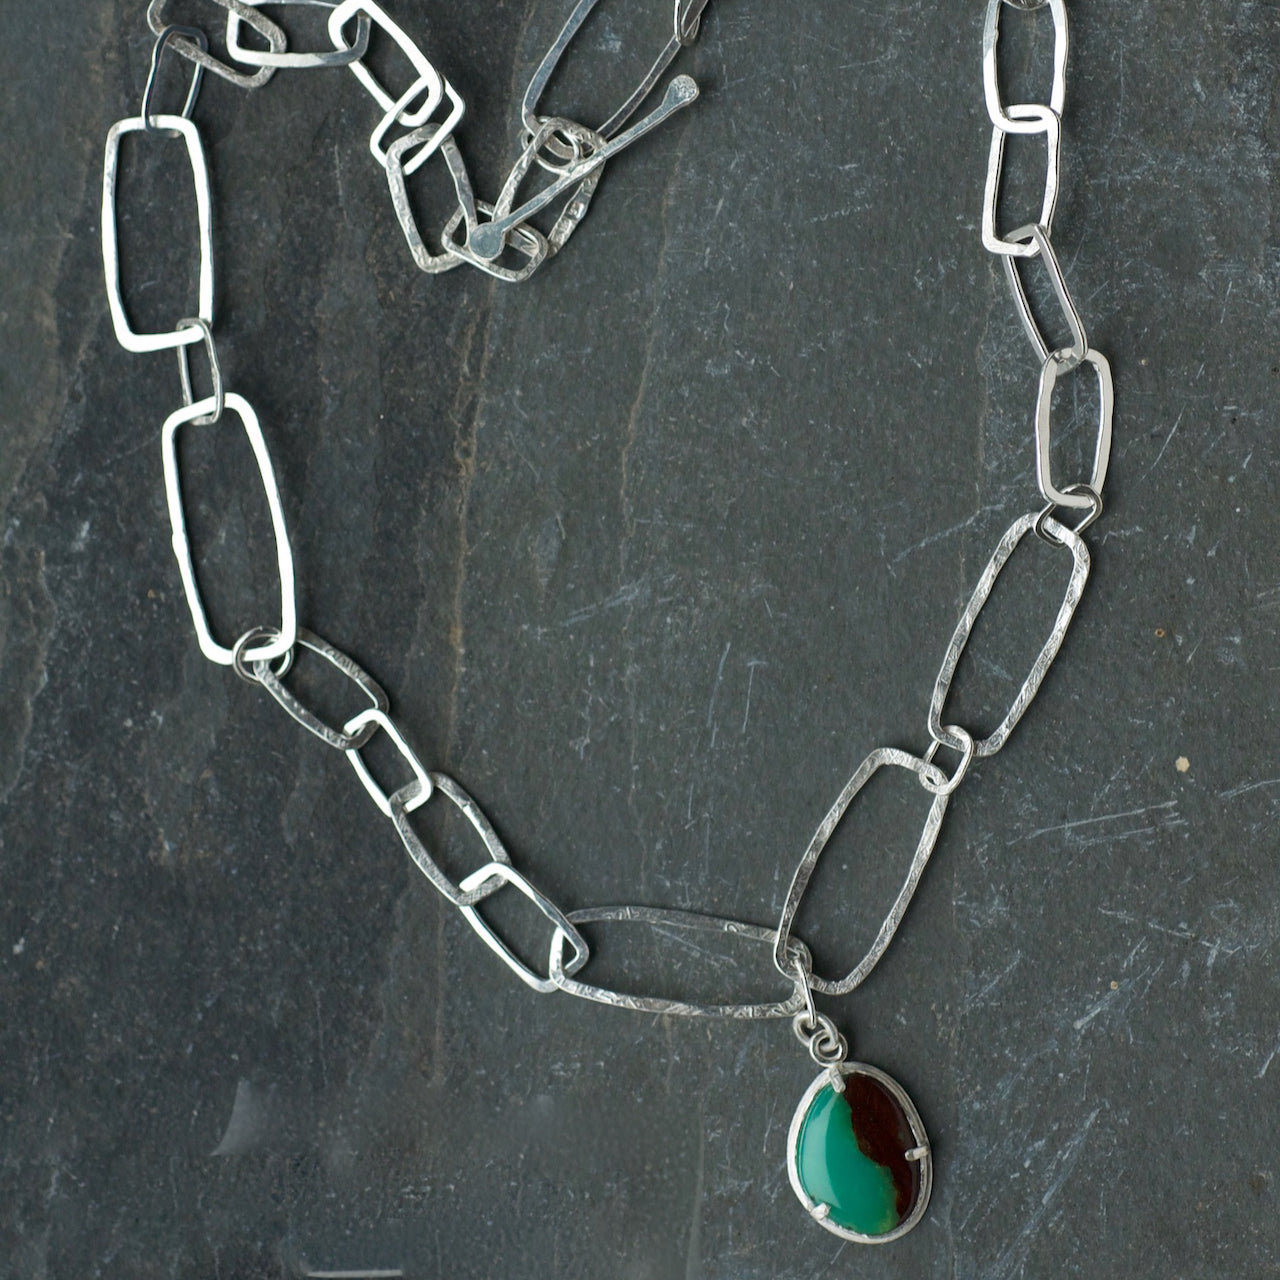 Monolith shaped silver chain link necklace with Chrysoprase Pendant by artist Lucy Spink